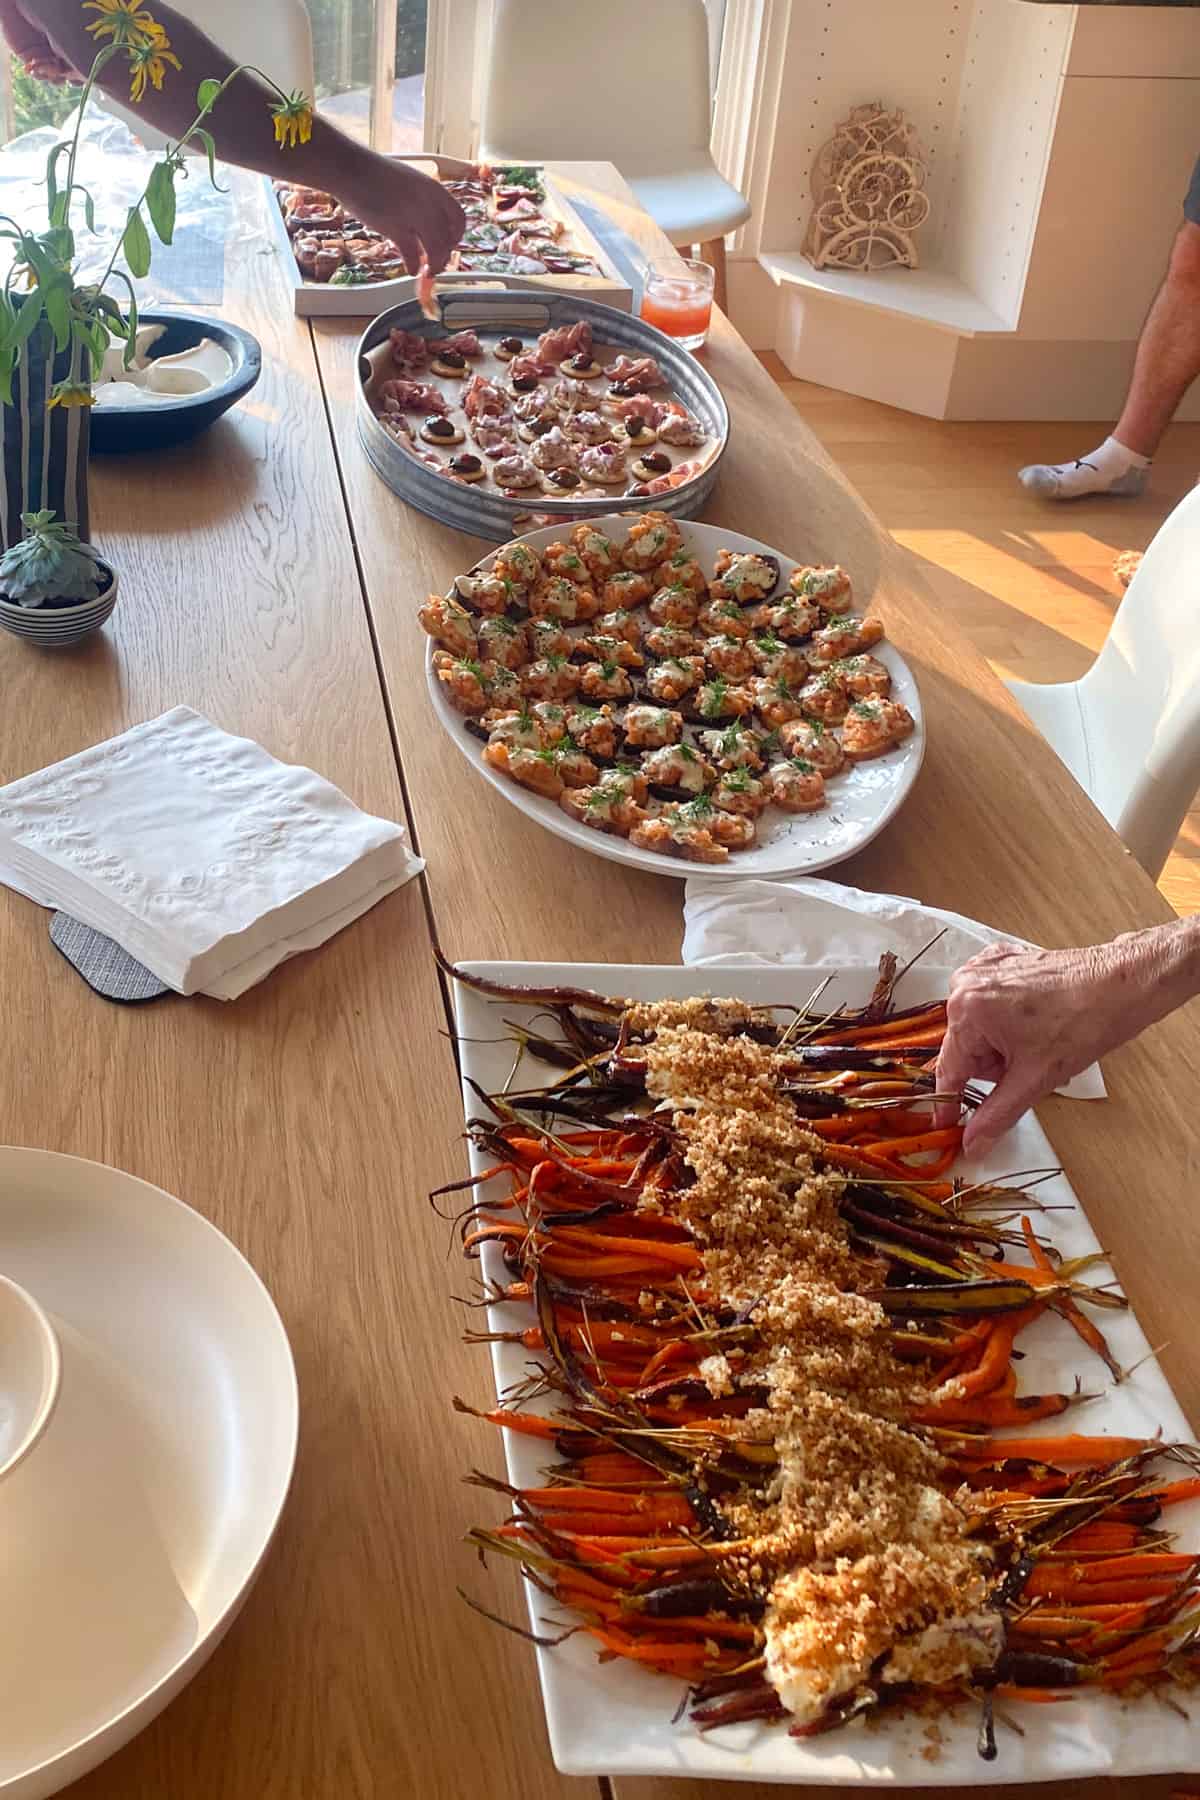 Table sset out with platters of appetizers including a large rectangular platter of roasted rainbow carrots with whipped feta down the center and toasted breadcrumbs sprinkled over the feta